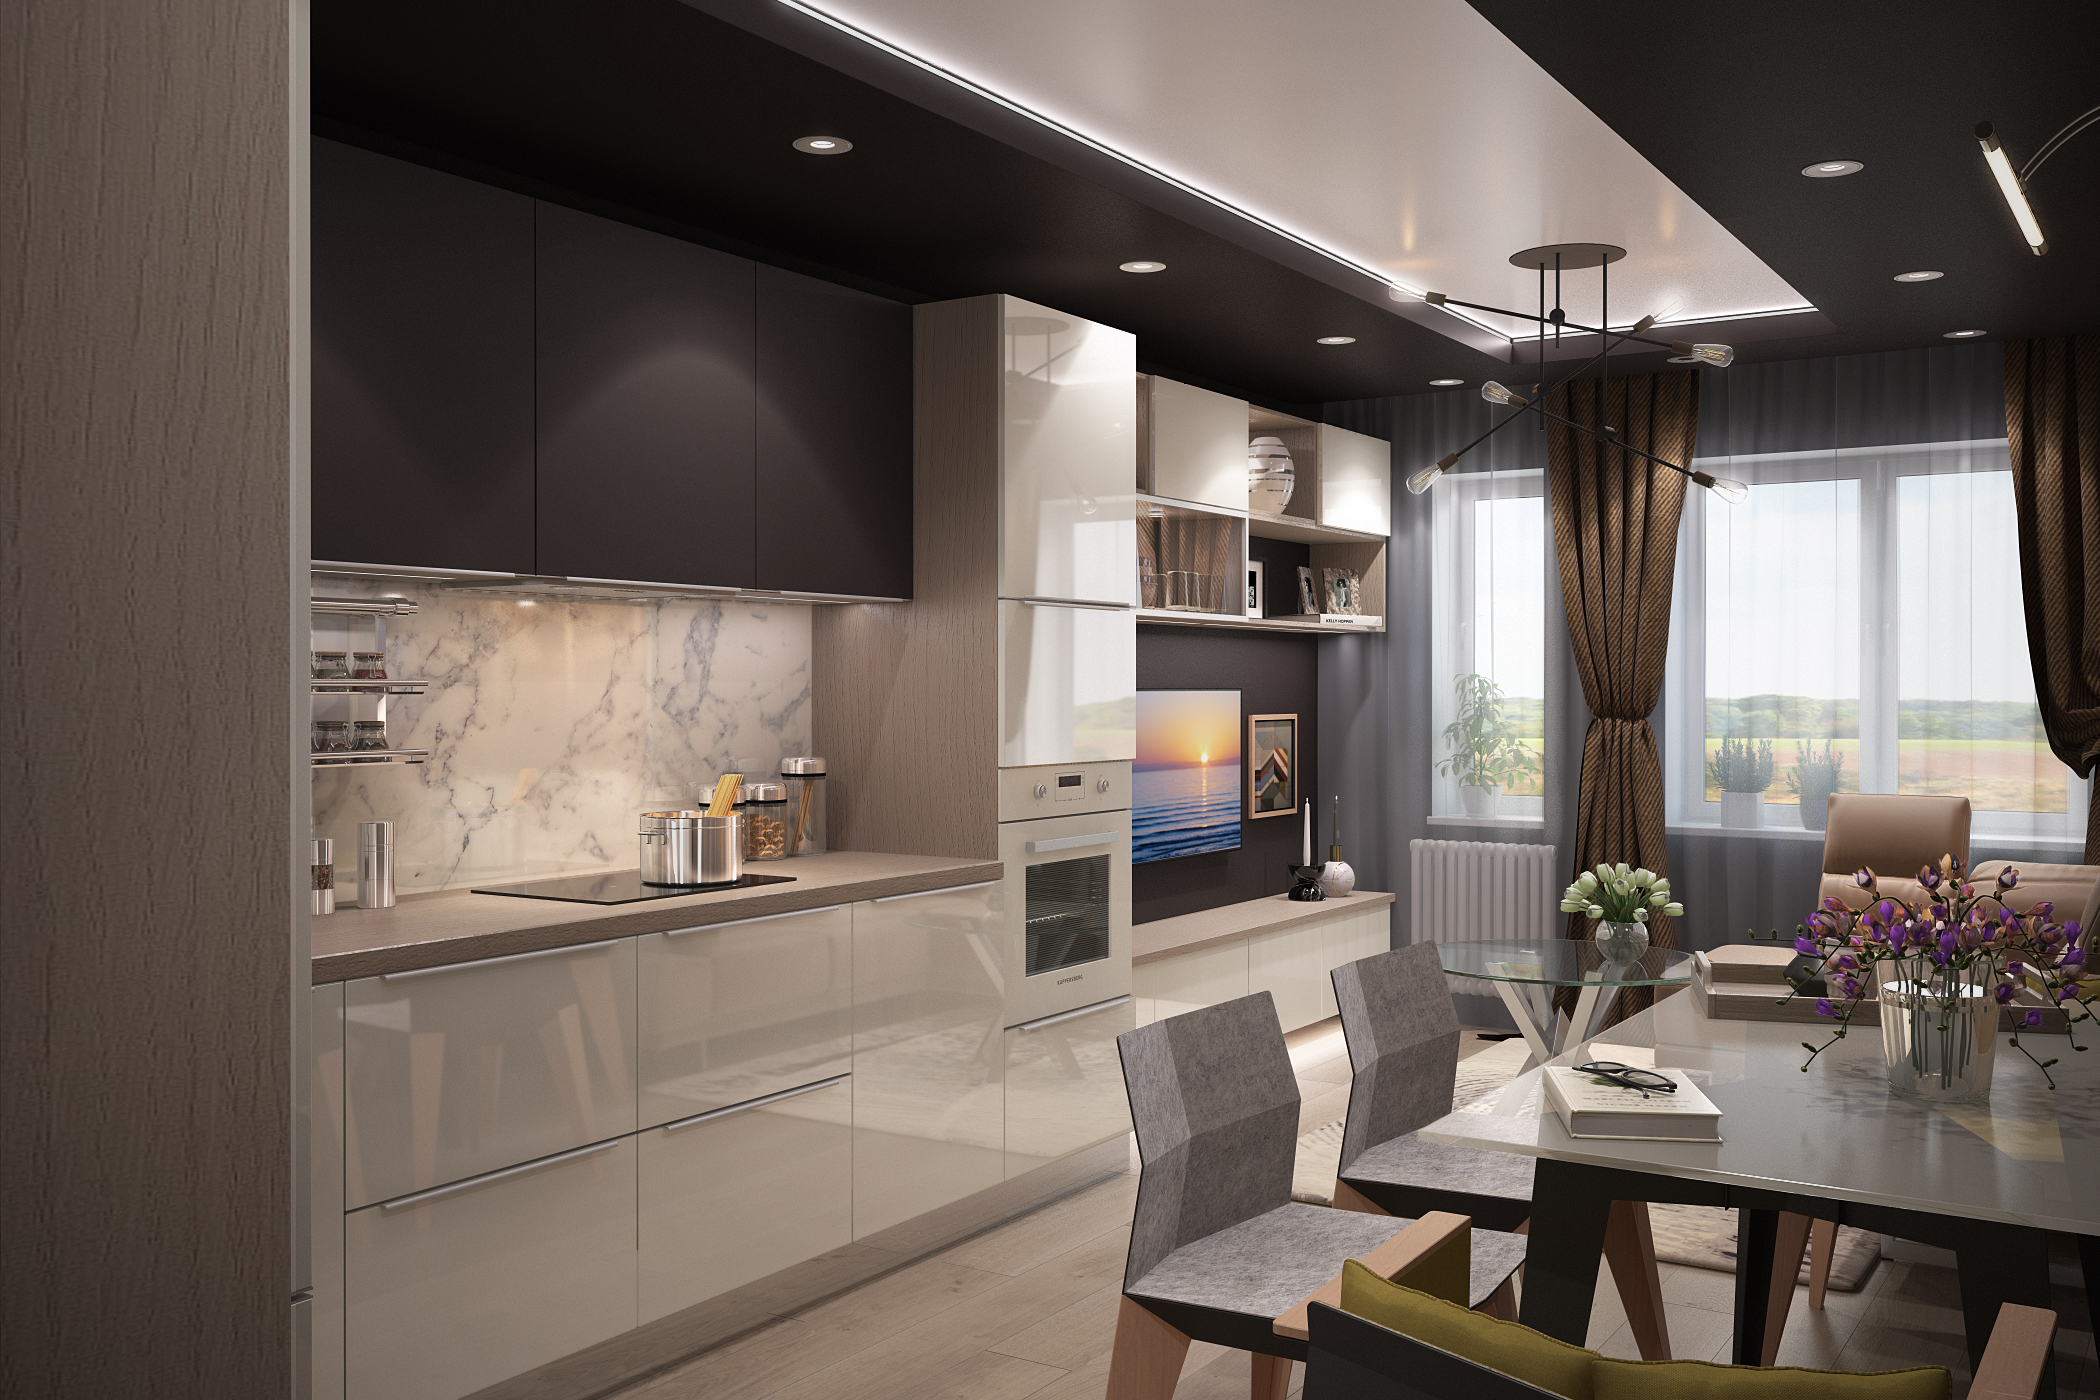 Kitchen and living room in 3d max vray 3.0 image